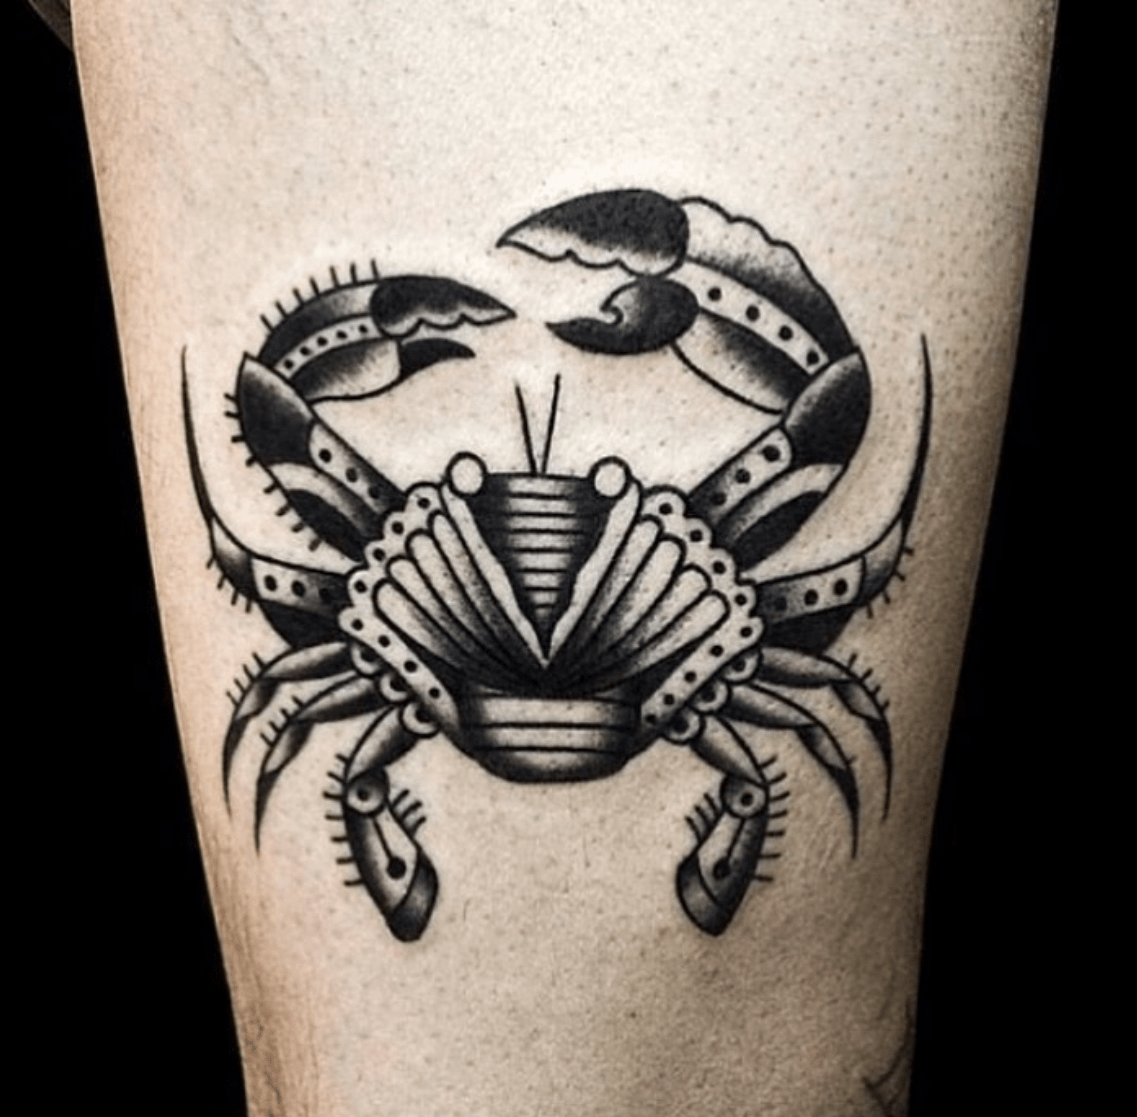 This mandala crab tattoo has an extra meaning as a symbol of the star sign  Cancer | Ratta Tattoo